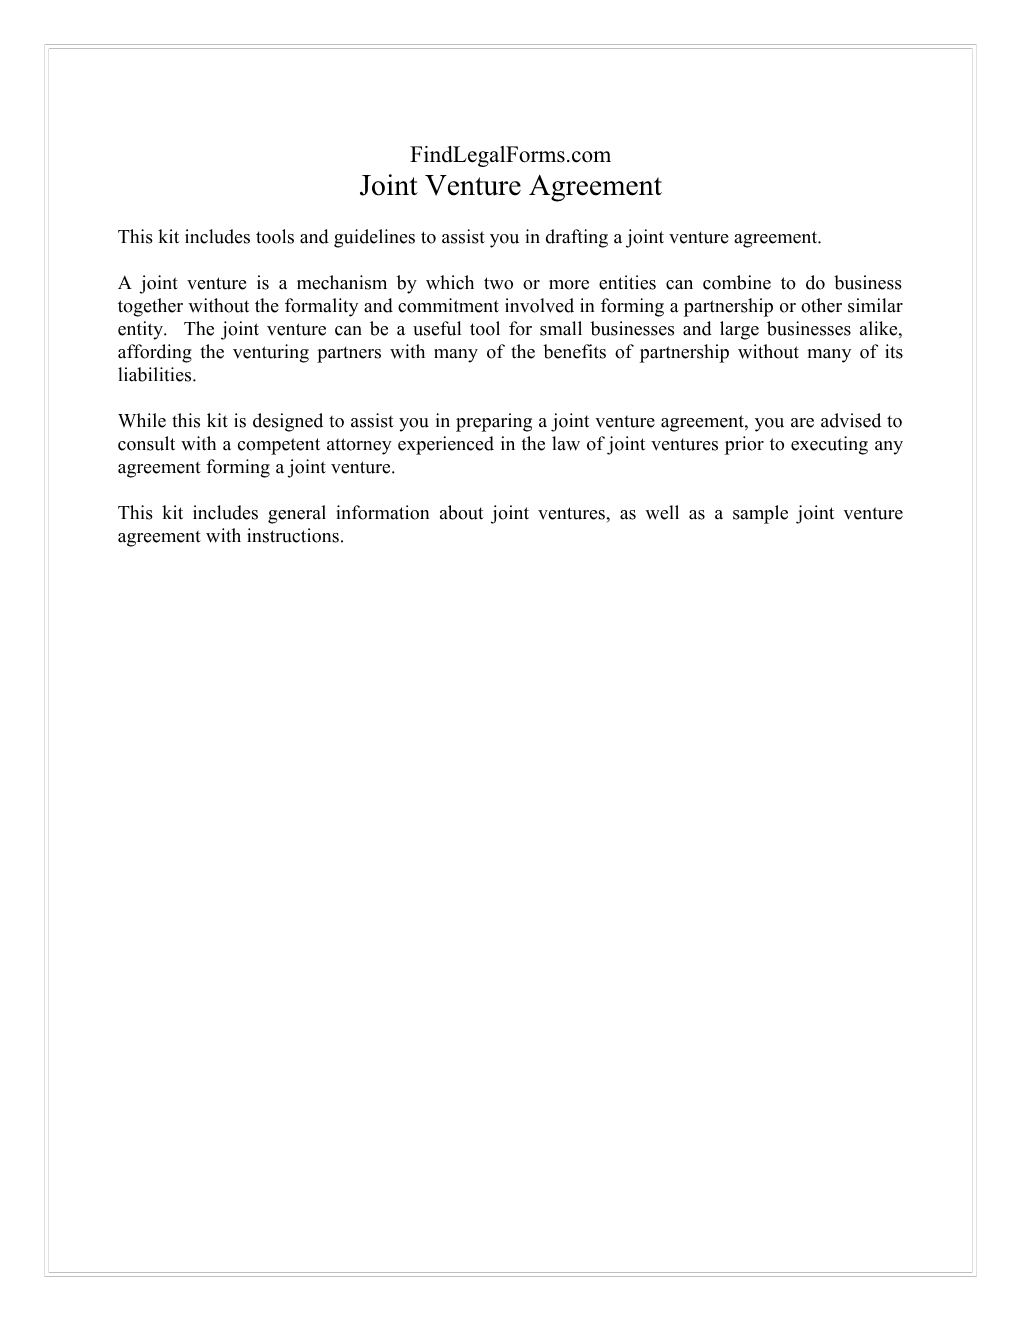 Joint Venture Agreement s1